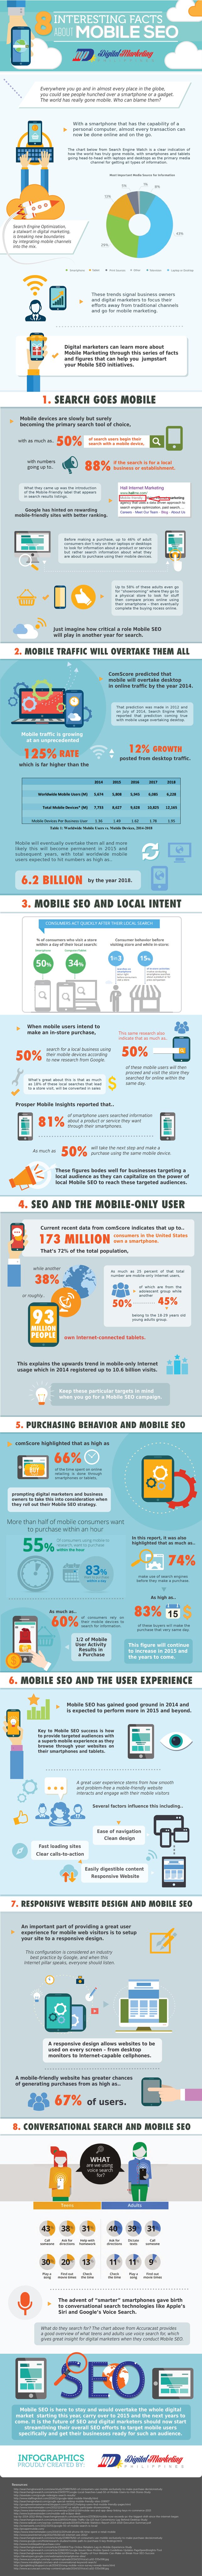 infographie-a-savoir-referencement-mobile